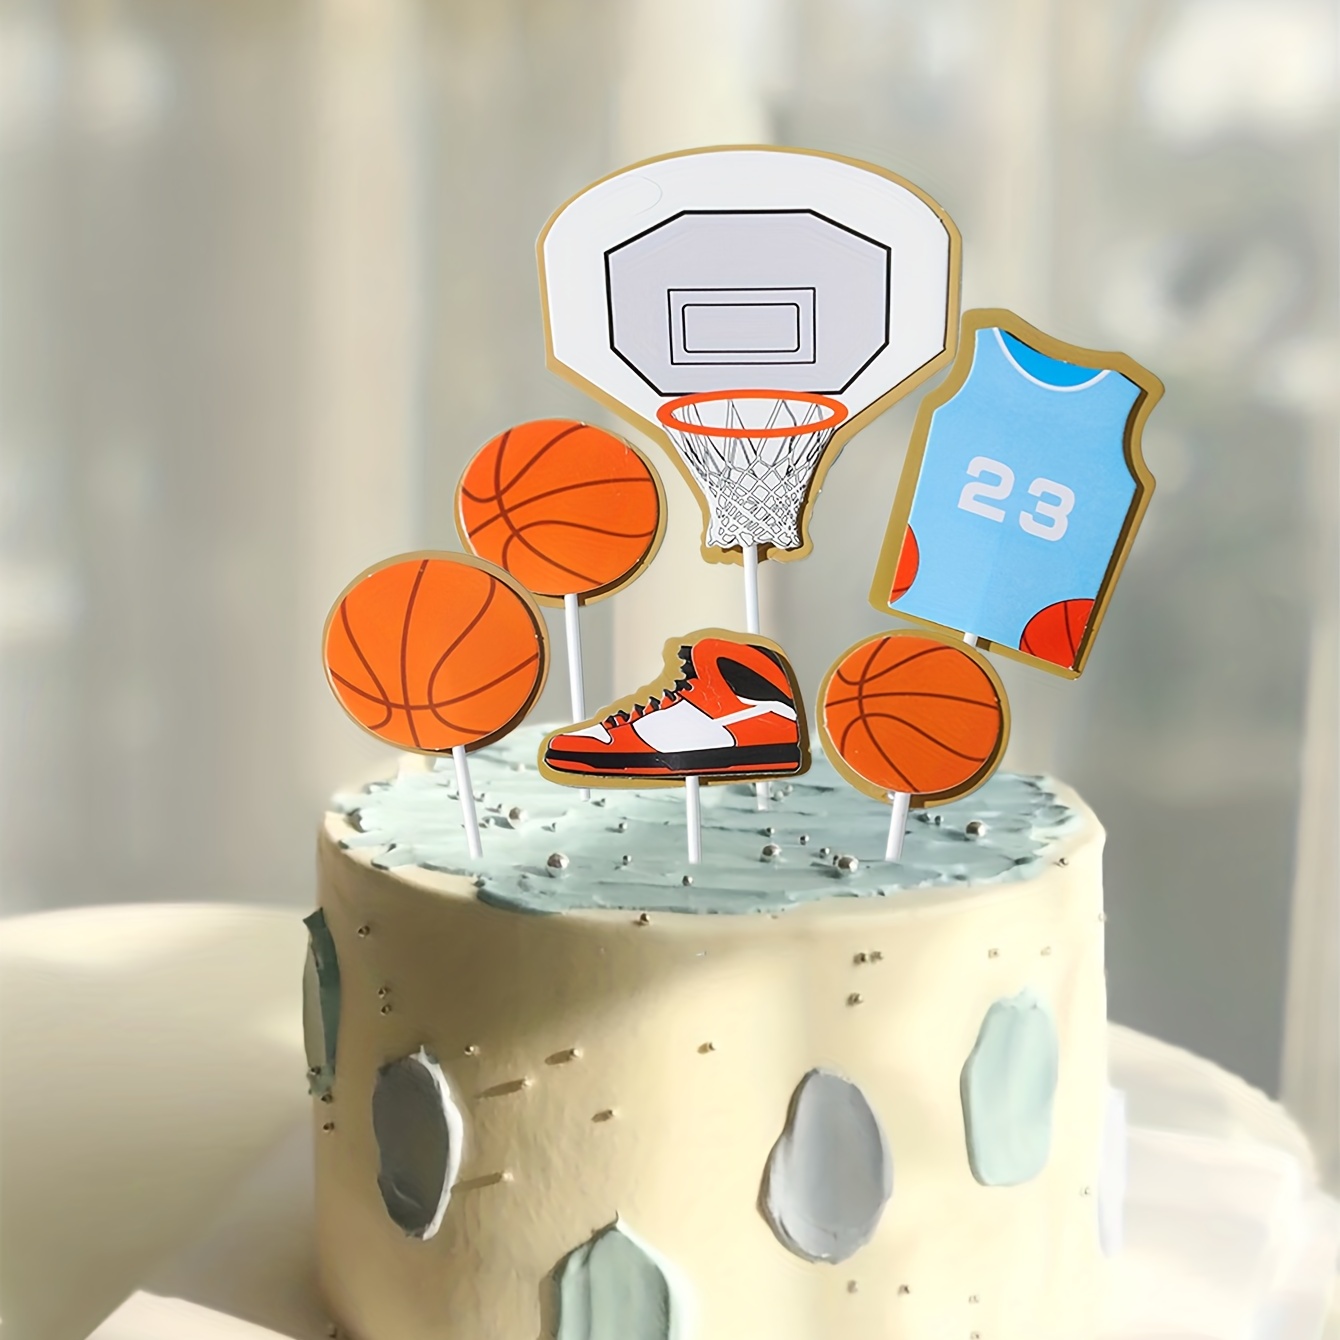 Basketball Cake Toppers, Basketball Star Themed Cake Decorations ...